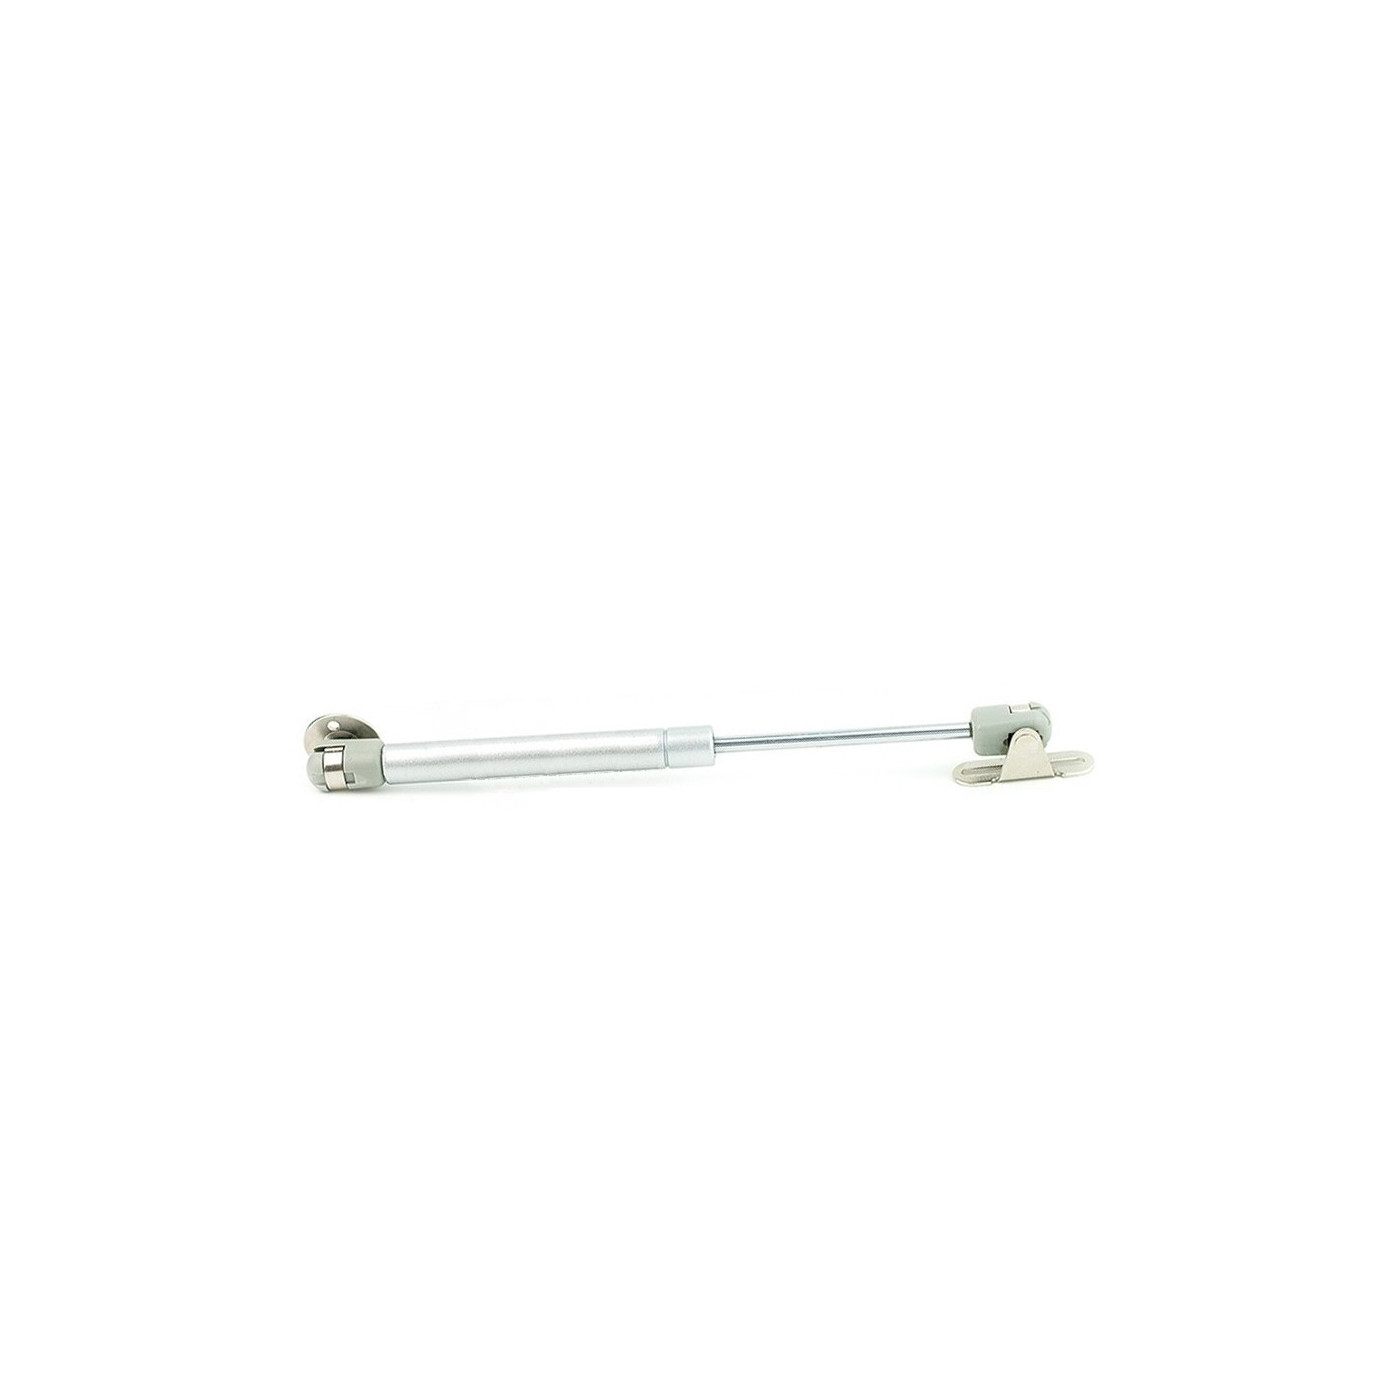 Universal gas spring with brackets (100N/10kg, 244 mm, silver)